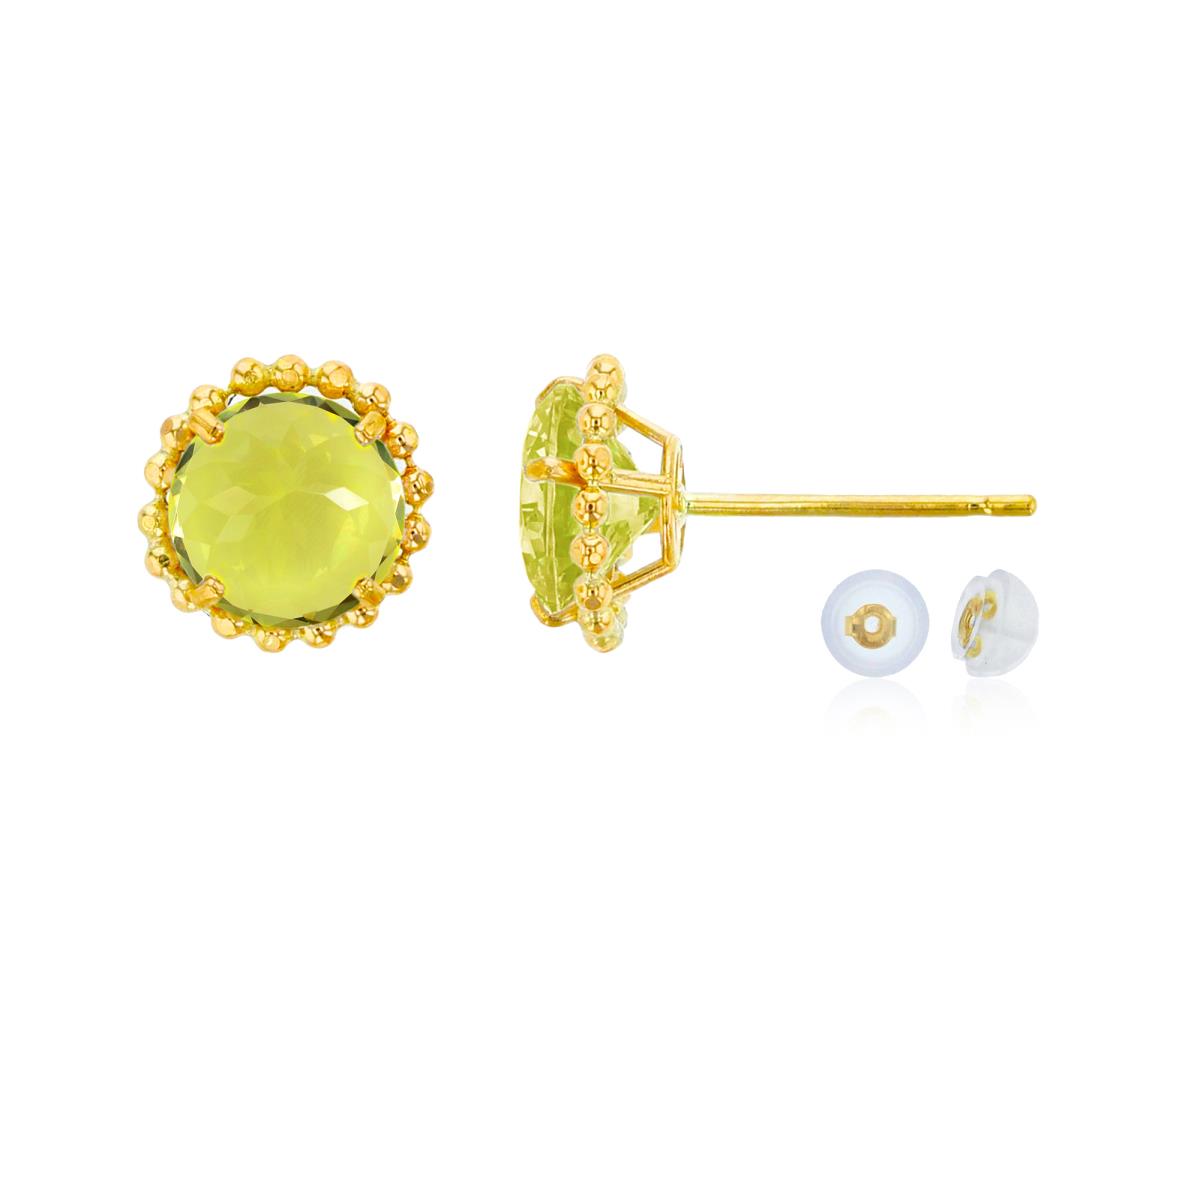 10K Yellow Gold 5mm Rd Lemon Quartz with Bead Frame Stud Earring with Silicone Back